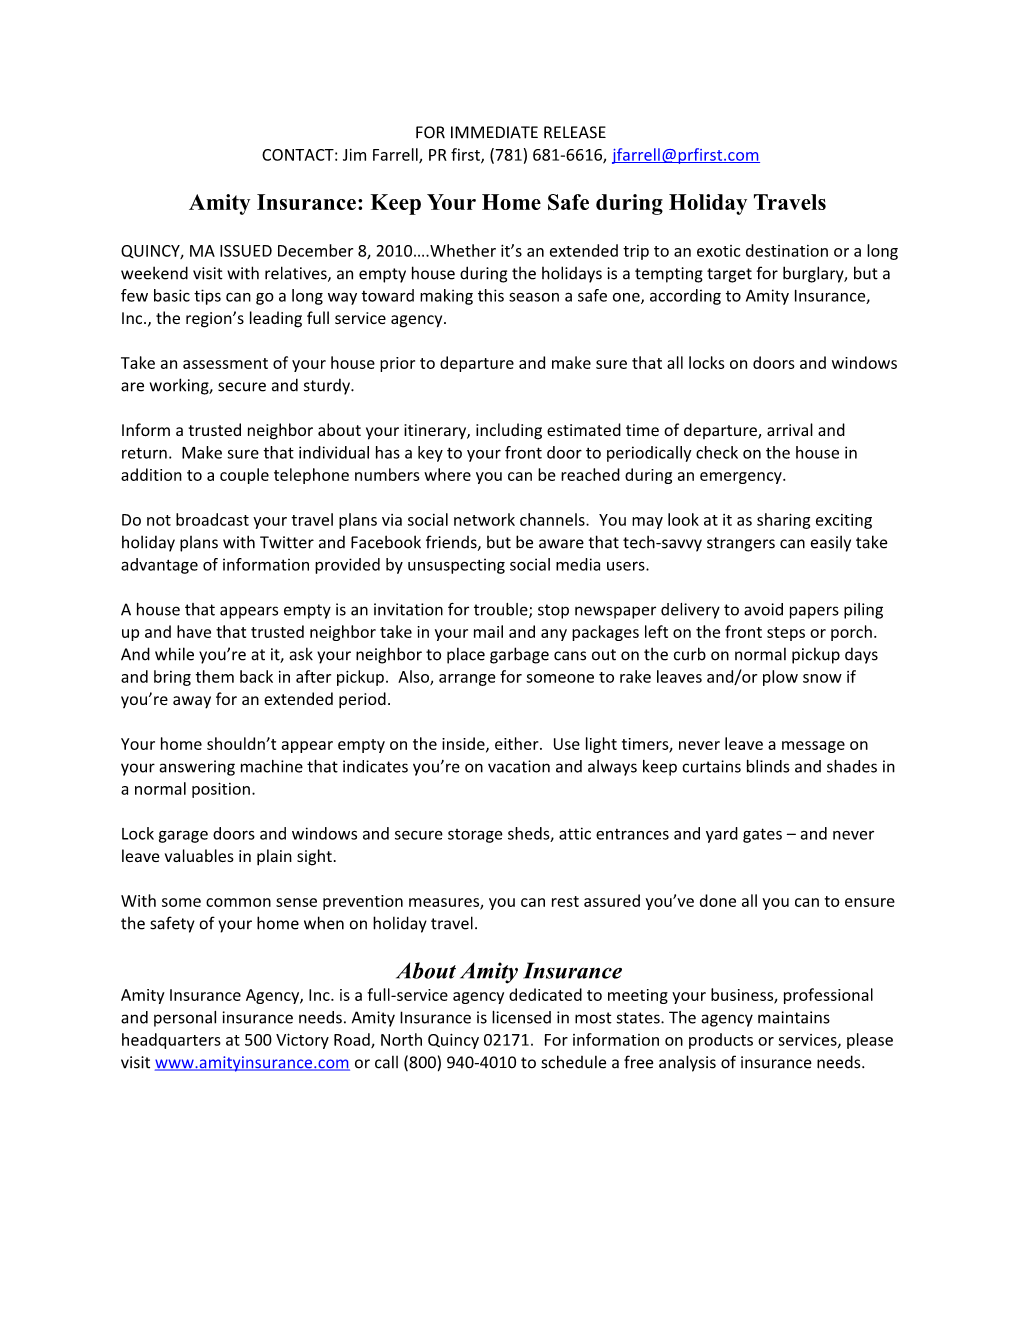 Amity Insurance: Keep Your Home Safe During Holiday Travels